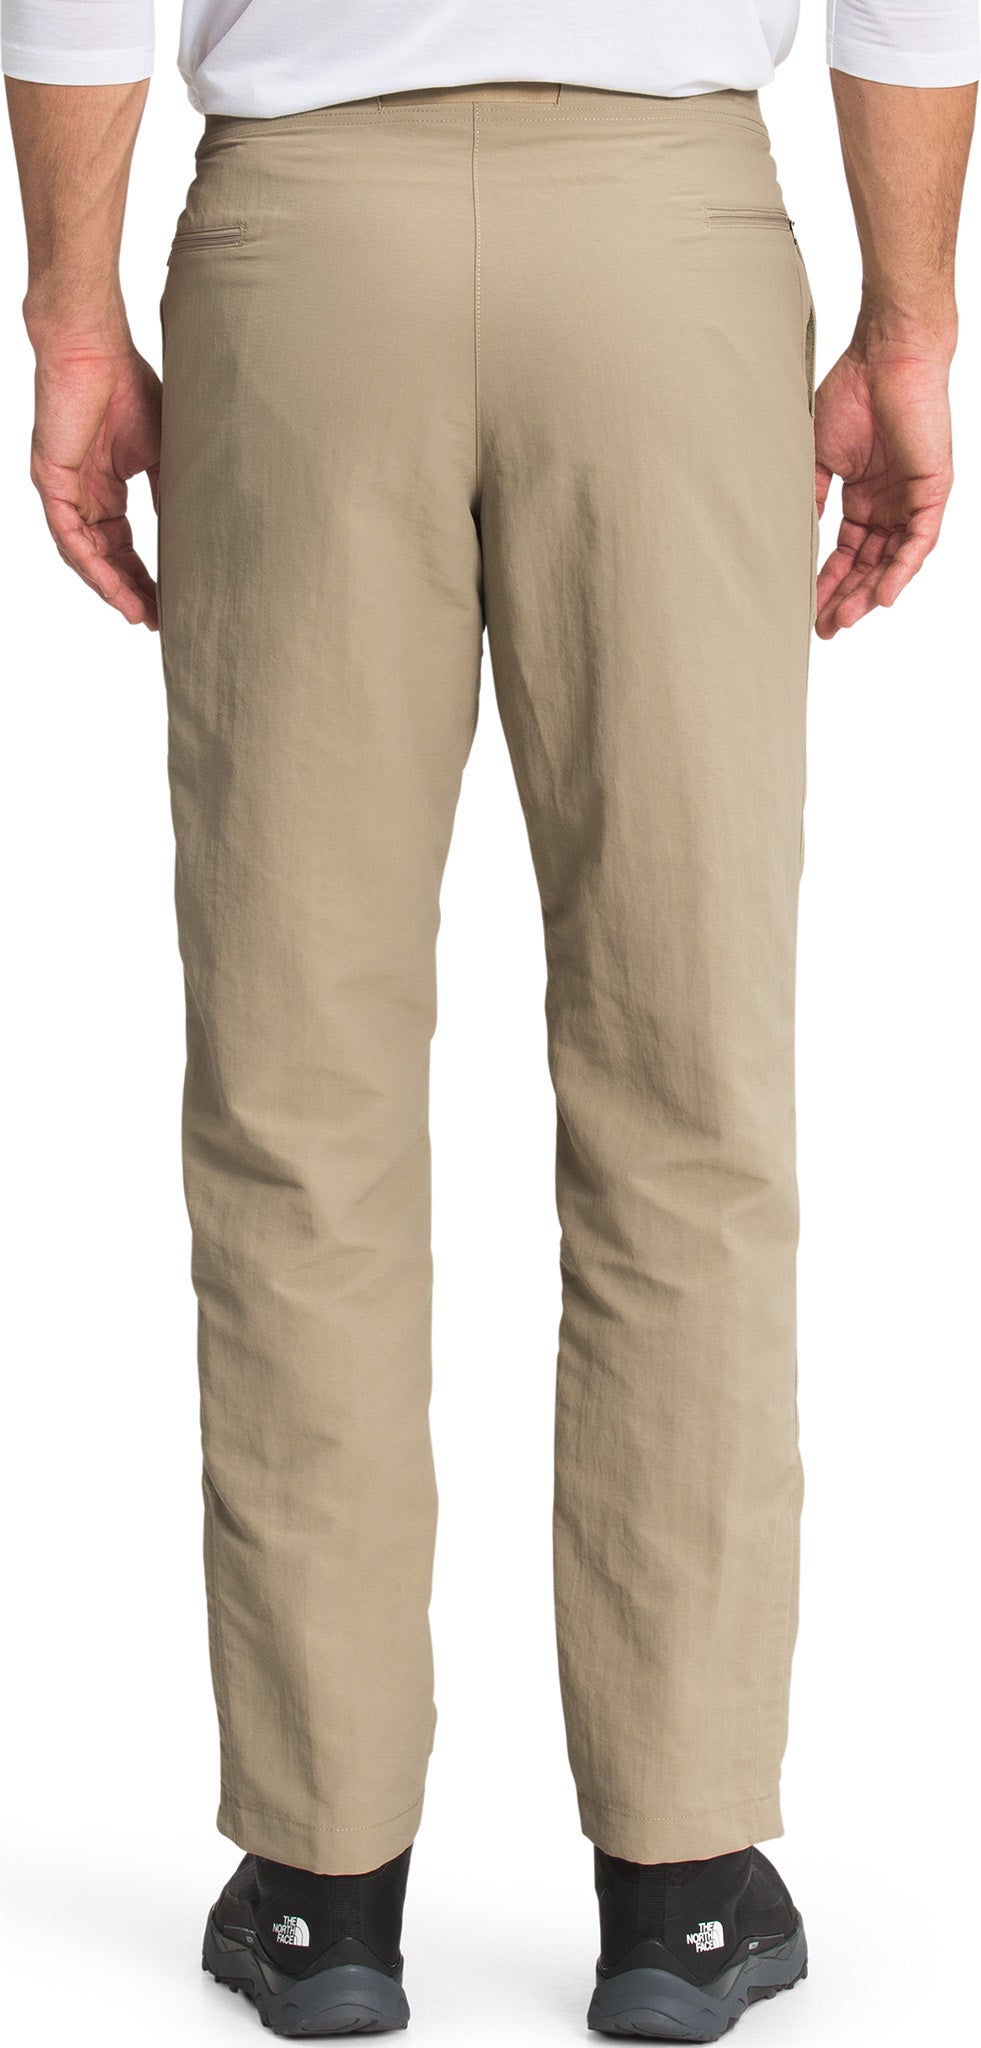 THE NORTH FACE Men039s Paramount Trail Hiking Pants SIZE 38 Dune Beige  NWT 6500  eBay